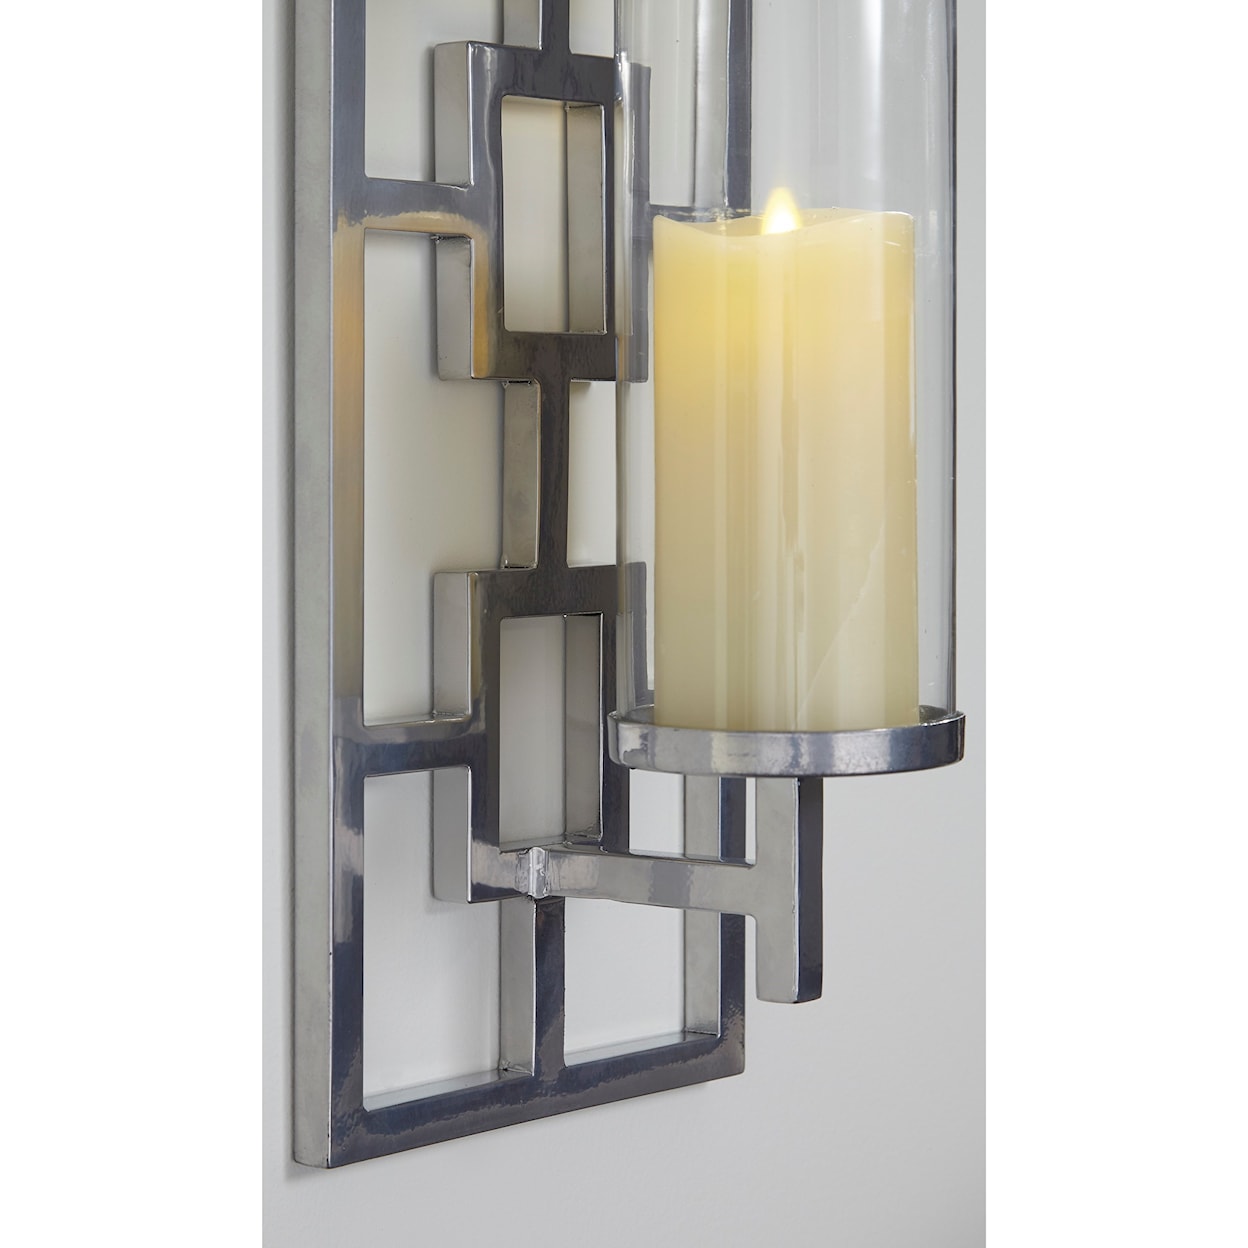 Signature Wall Art Brede Silver Finish Wall Sconce